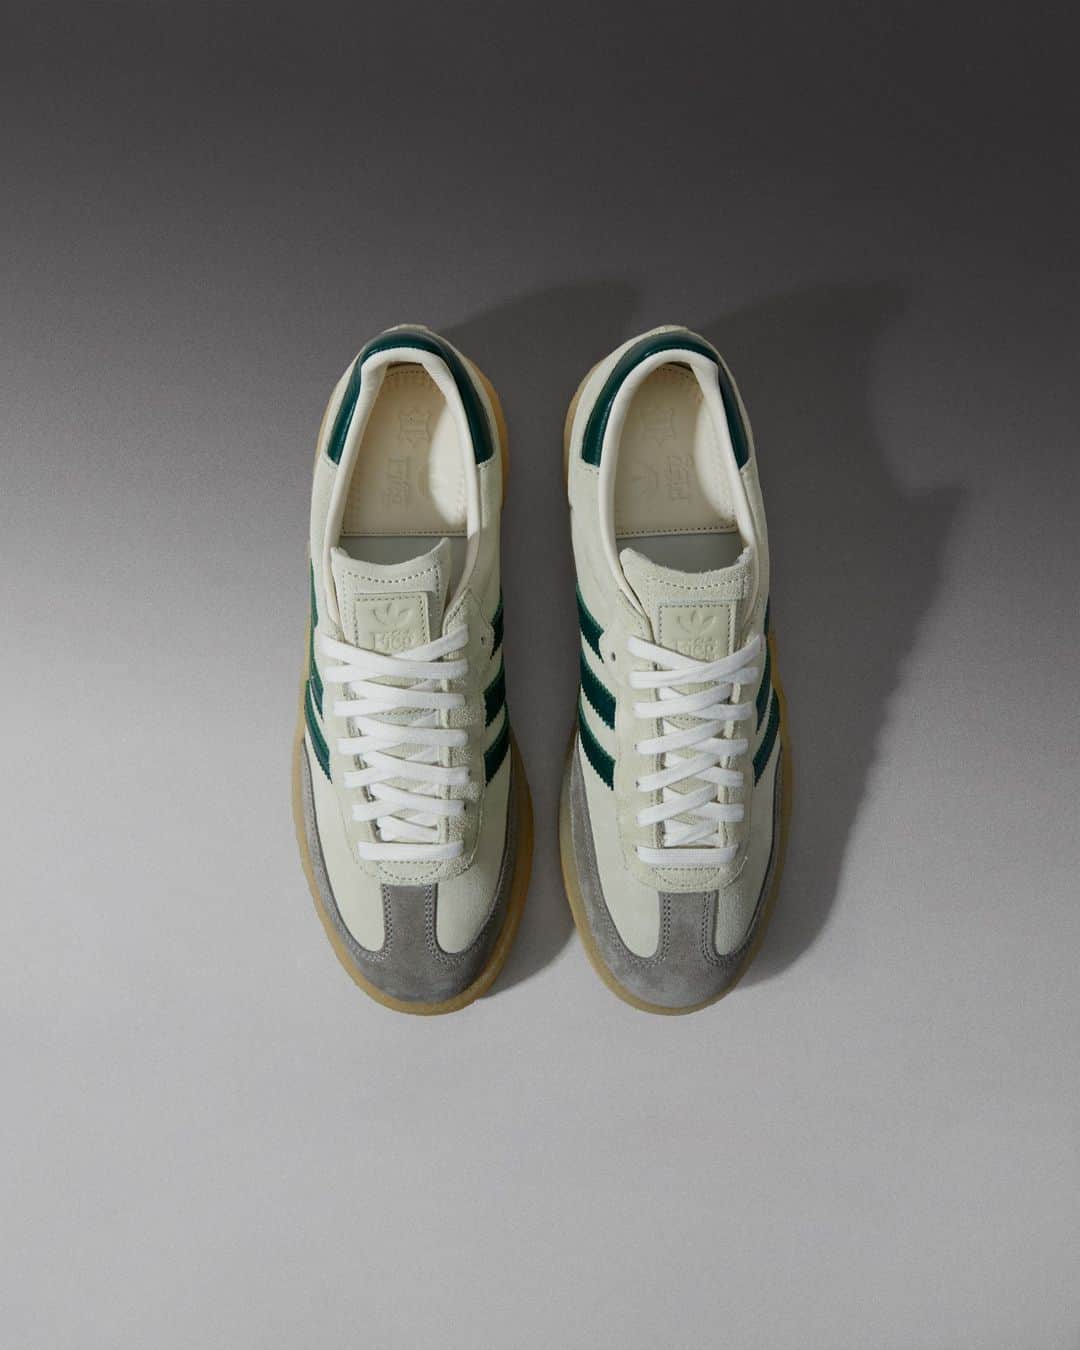 Flight Clubのインスタグラム：「Arriving via the triad of Ronnie Fieg, Clarks and adidas Originals, the 8th Street Samba 'Chalk White' brings a modern evolution to the Three Stripes silhouette. Clarks' signature crepe rubber sole upholds the refined cow suede upper. Three-way co-branding marks the tongue.」